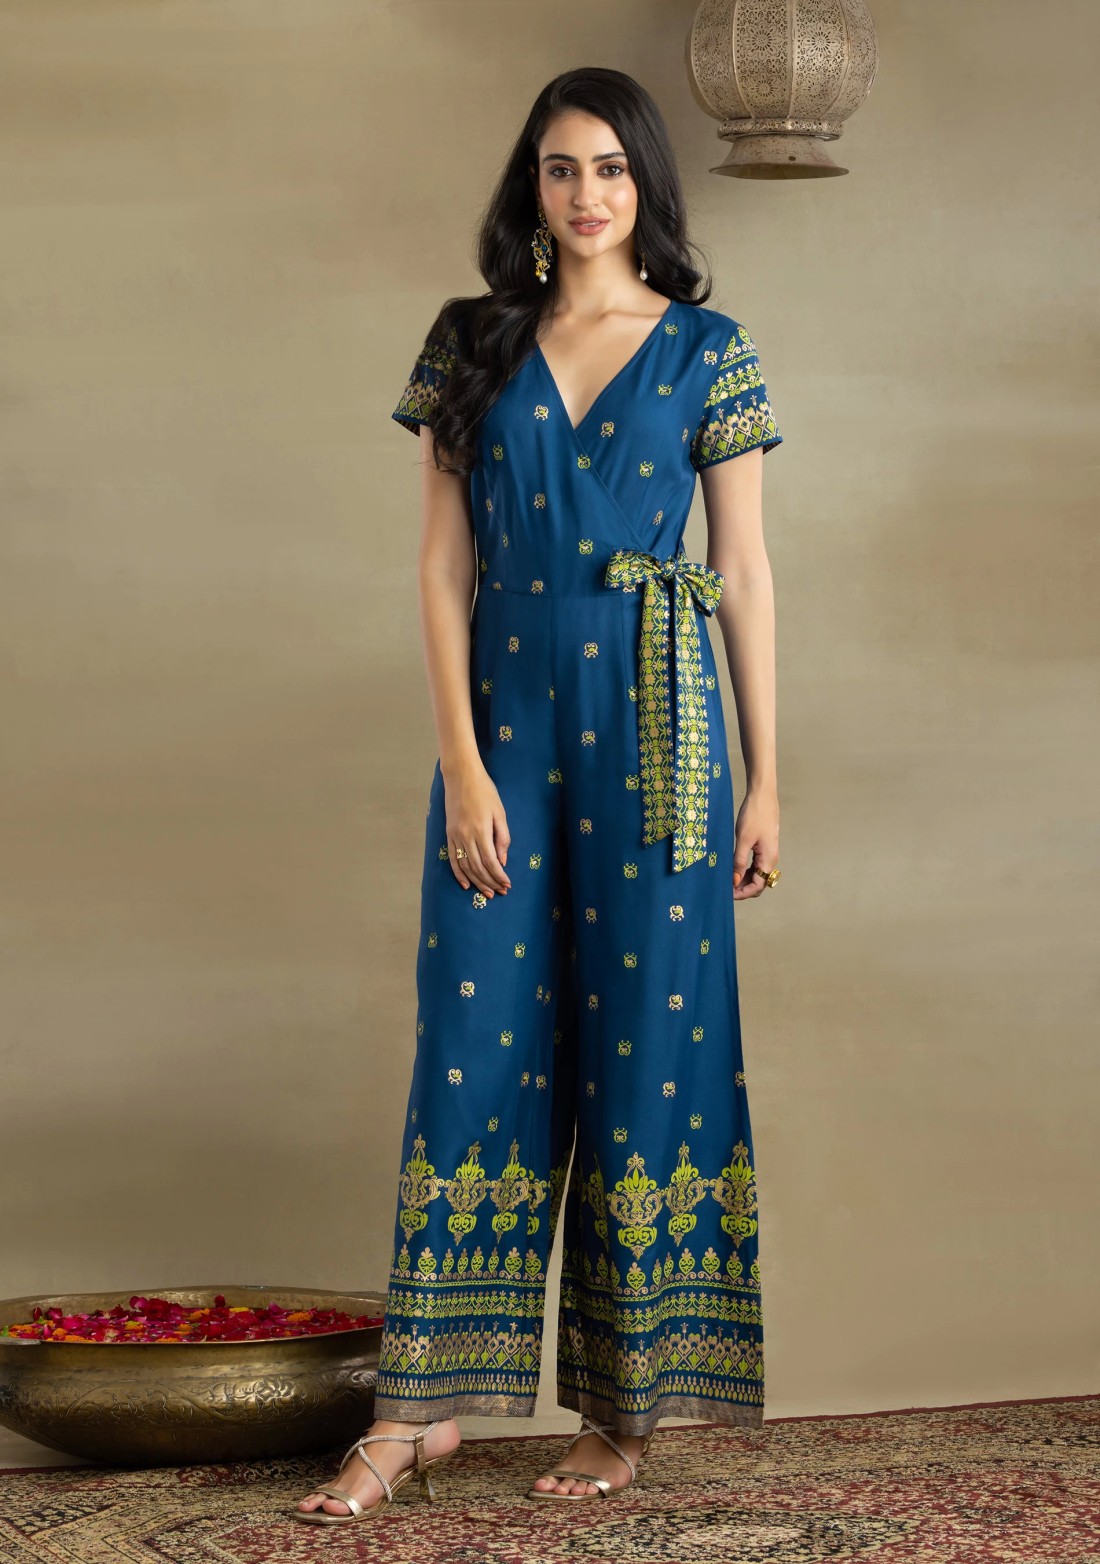 Electric blue ethnic jumpsuit - THE LITTLE CELEBS - 4153656-calidas.vn